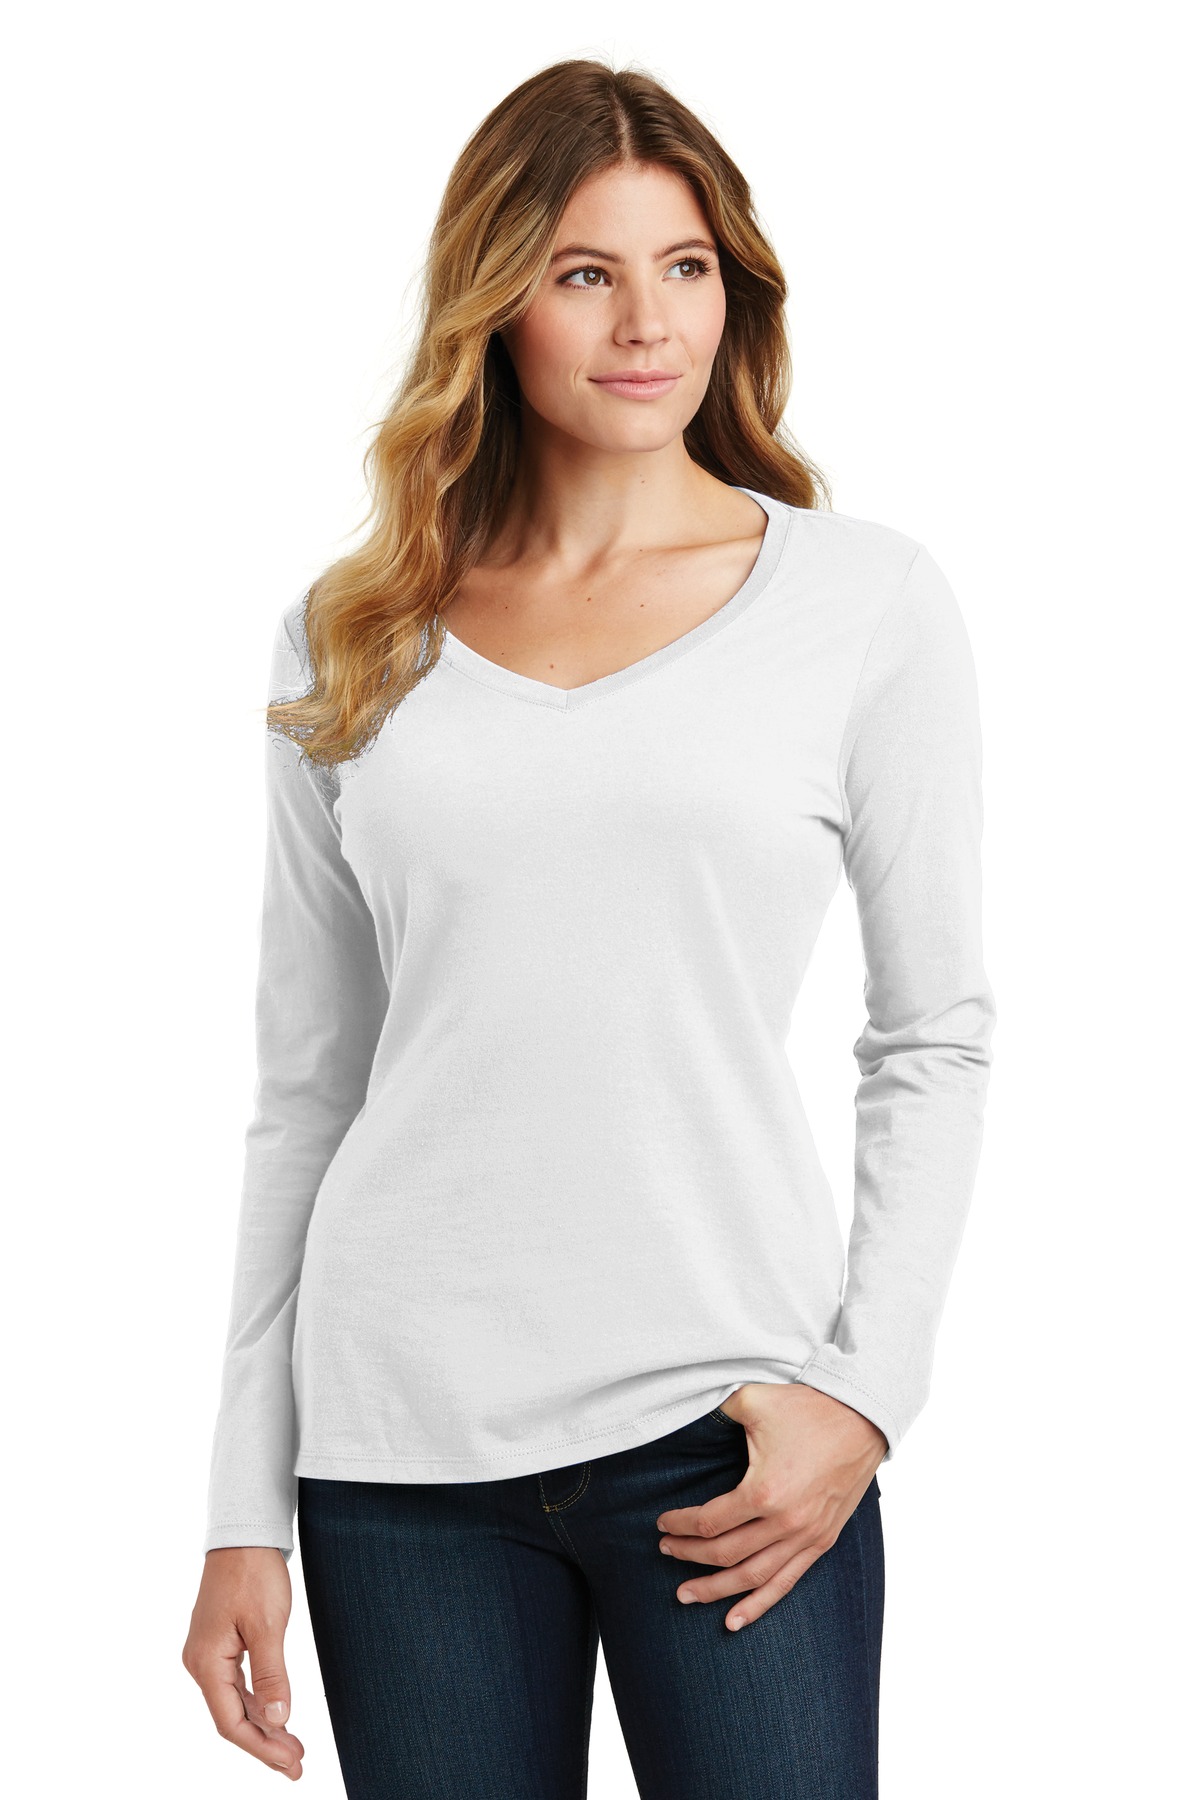 Port and Company Ladies Long Sleeve Fan Favorite V-Neck Tee. LPC450VLS